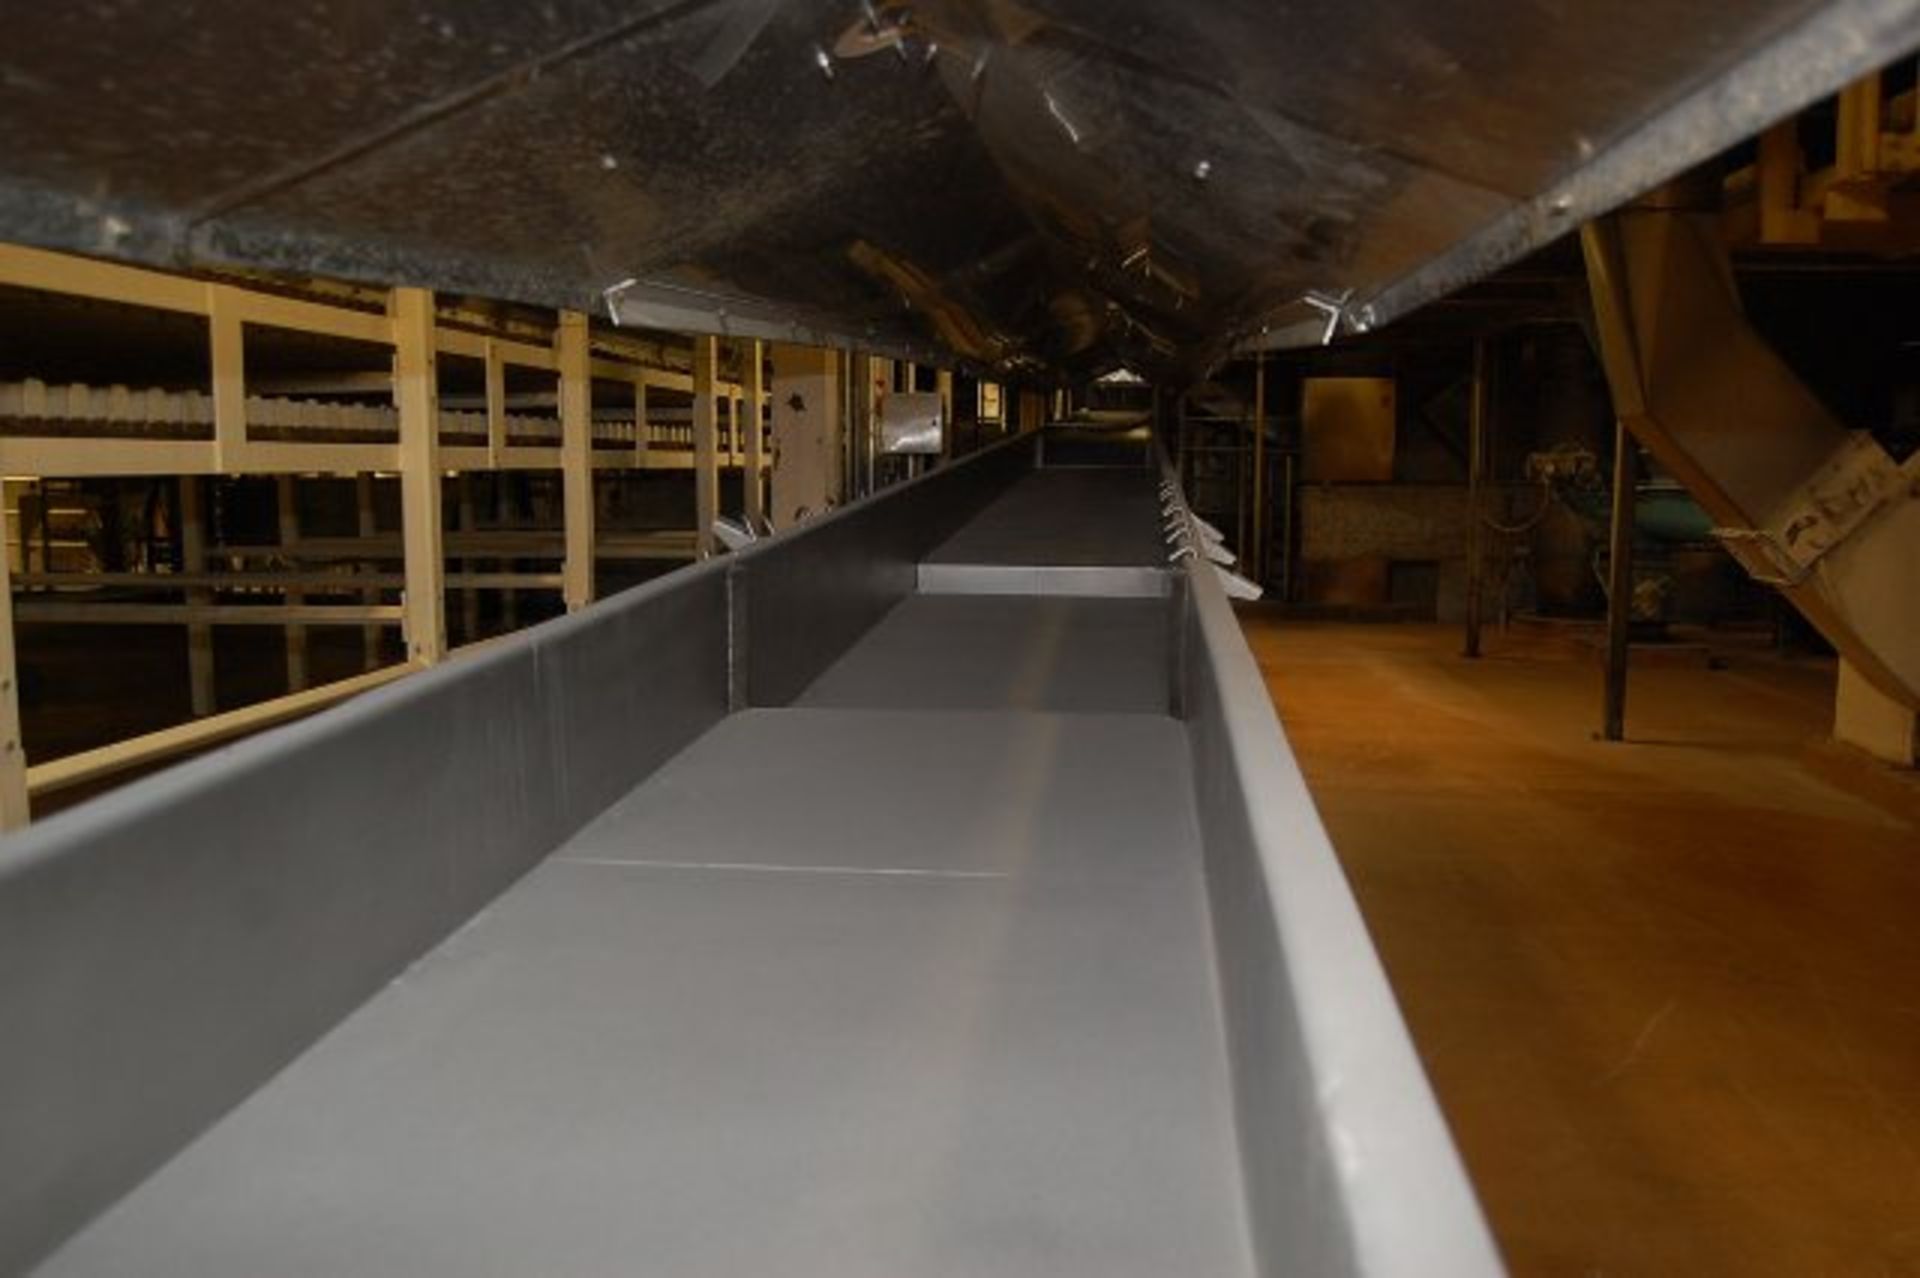 FMC Model #BL Vibratory Conveyor, Approx. 80 ft. Length x 23 in. Wide, Includes Hanging Cover, 460 - Bild 2 aus 2